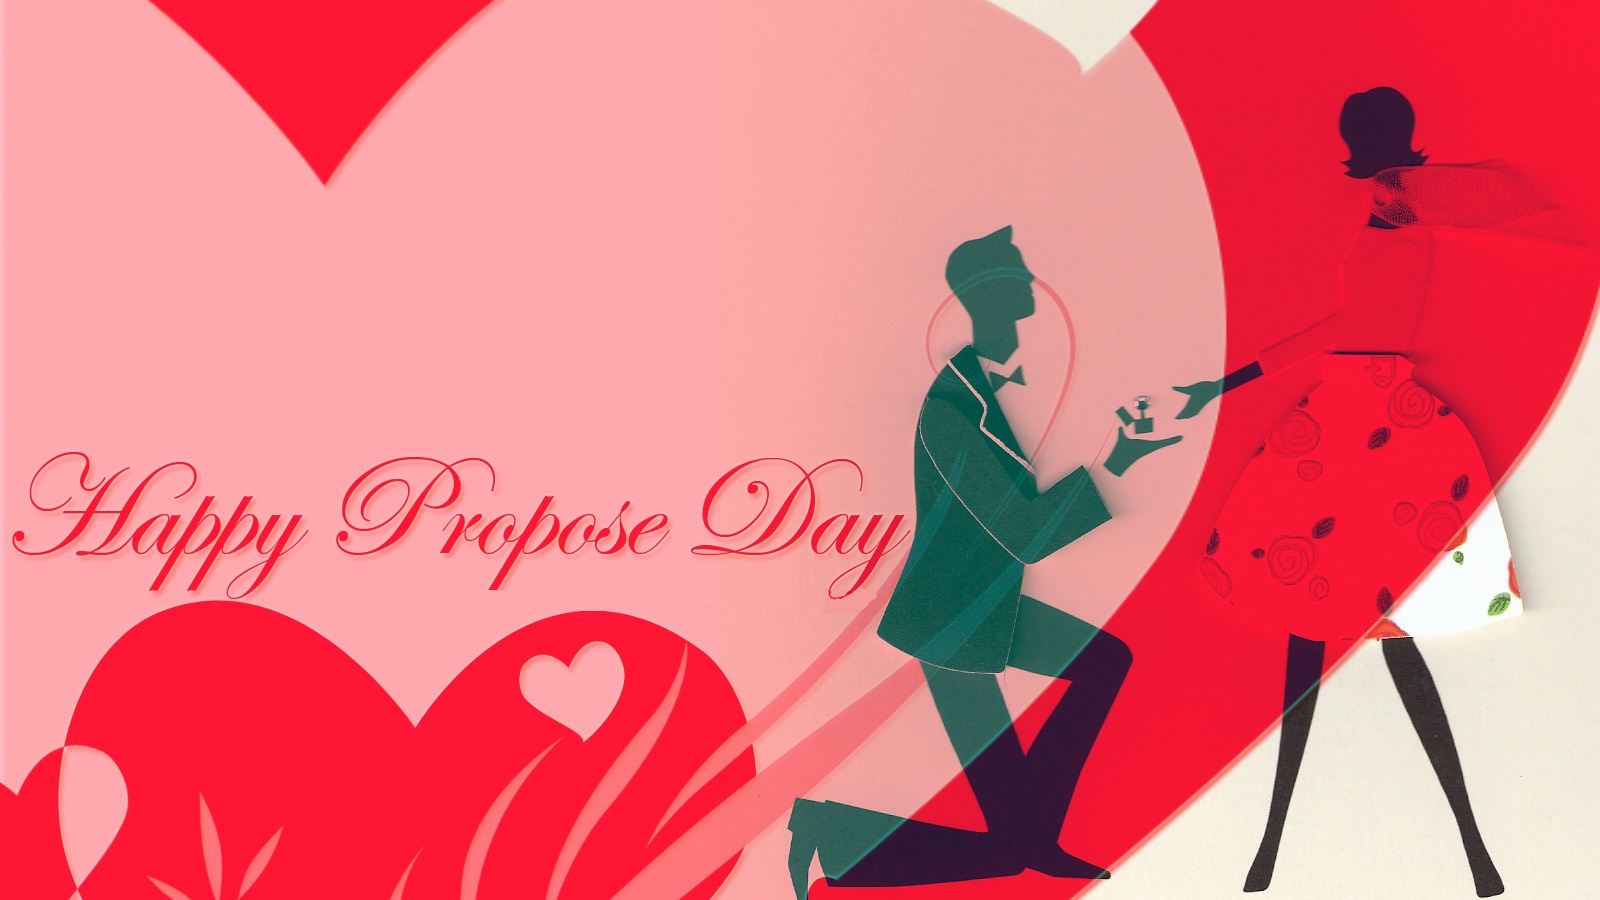 Propose Day Image Wall Papers Pics Pictures Photos For